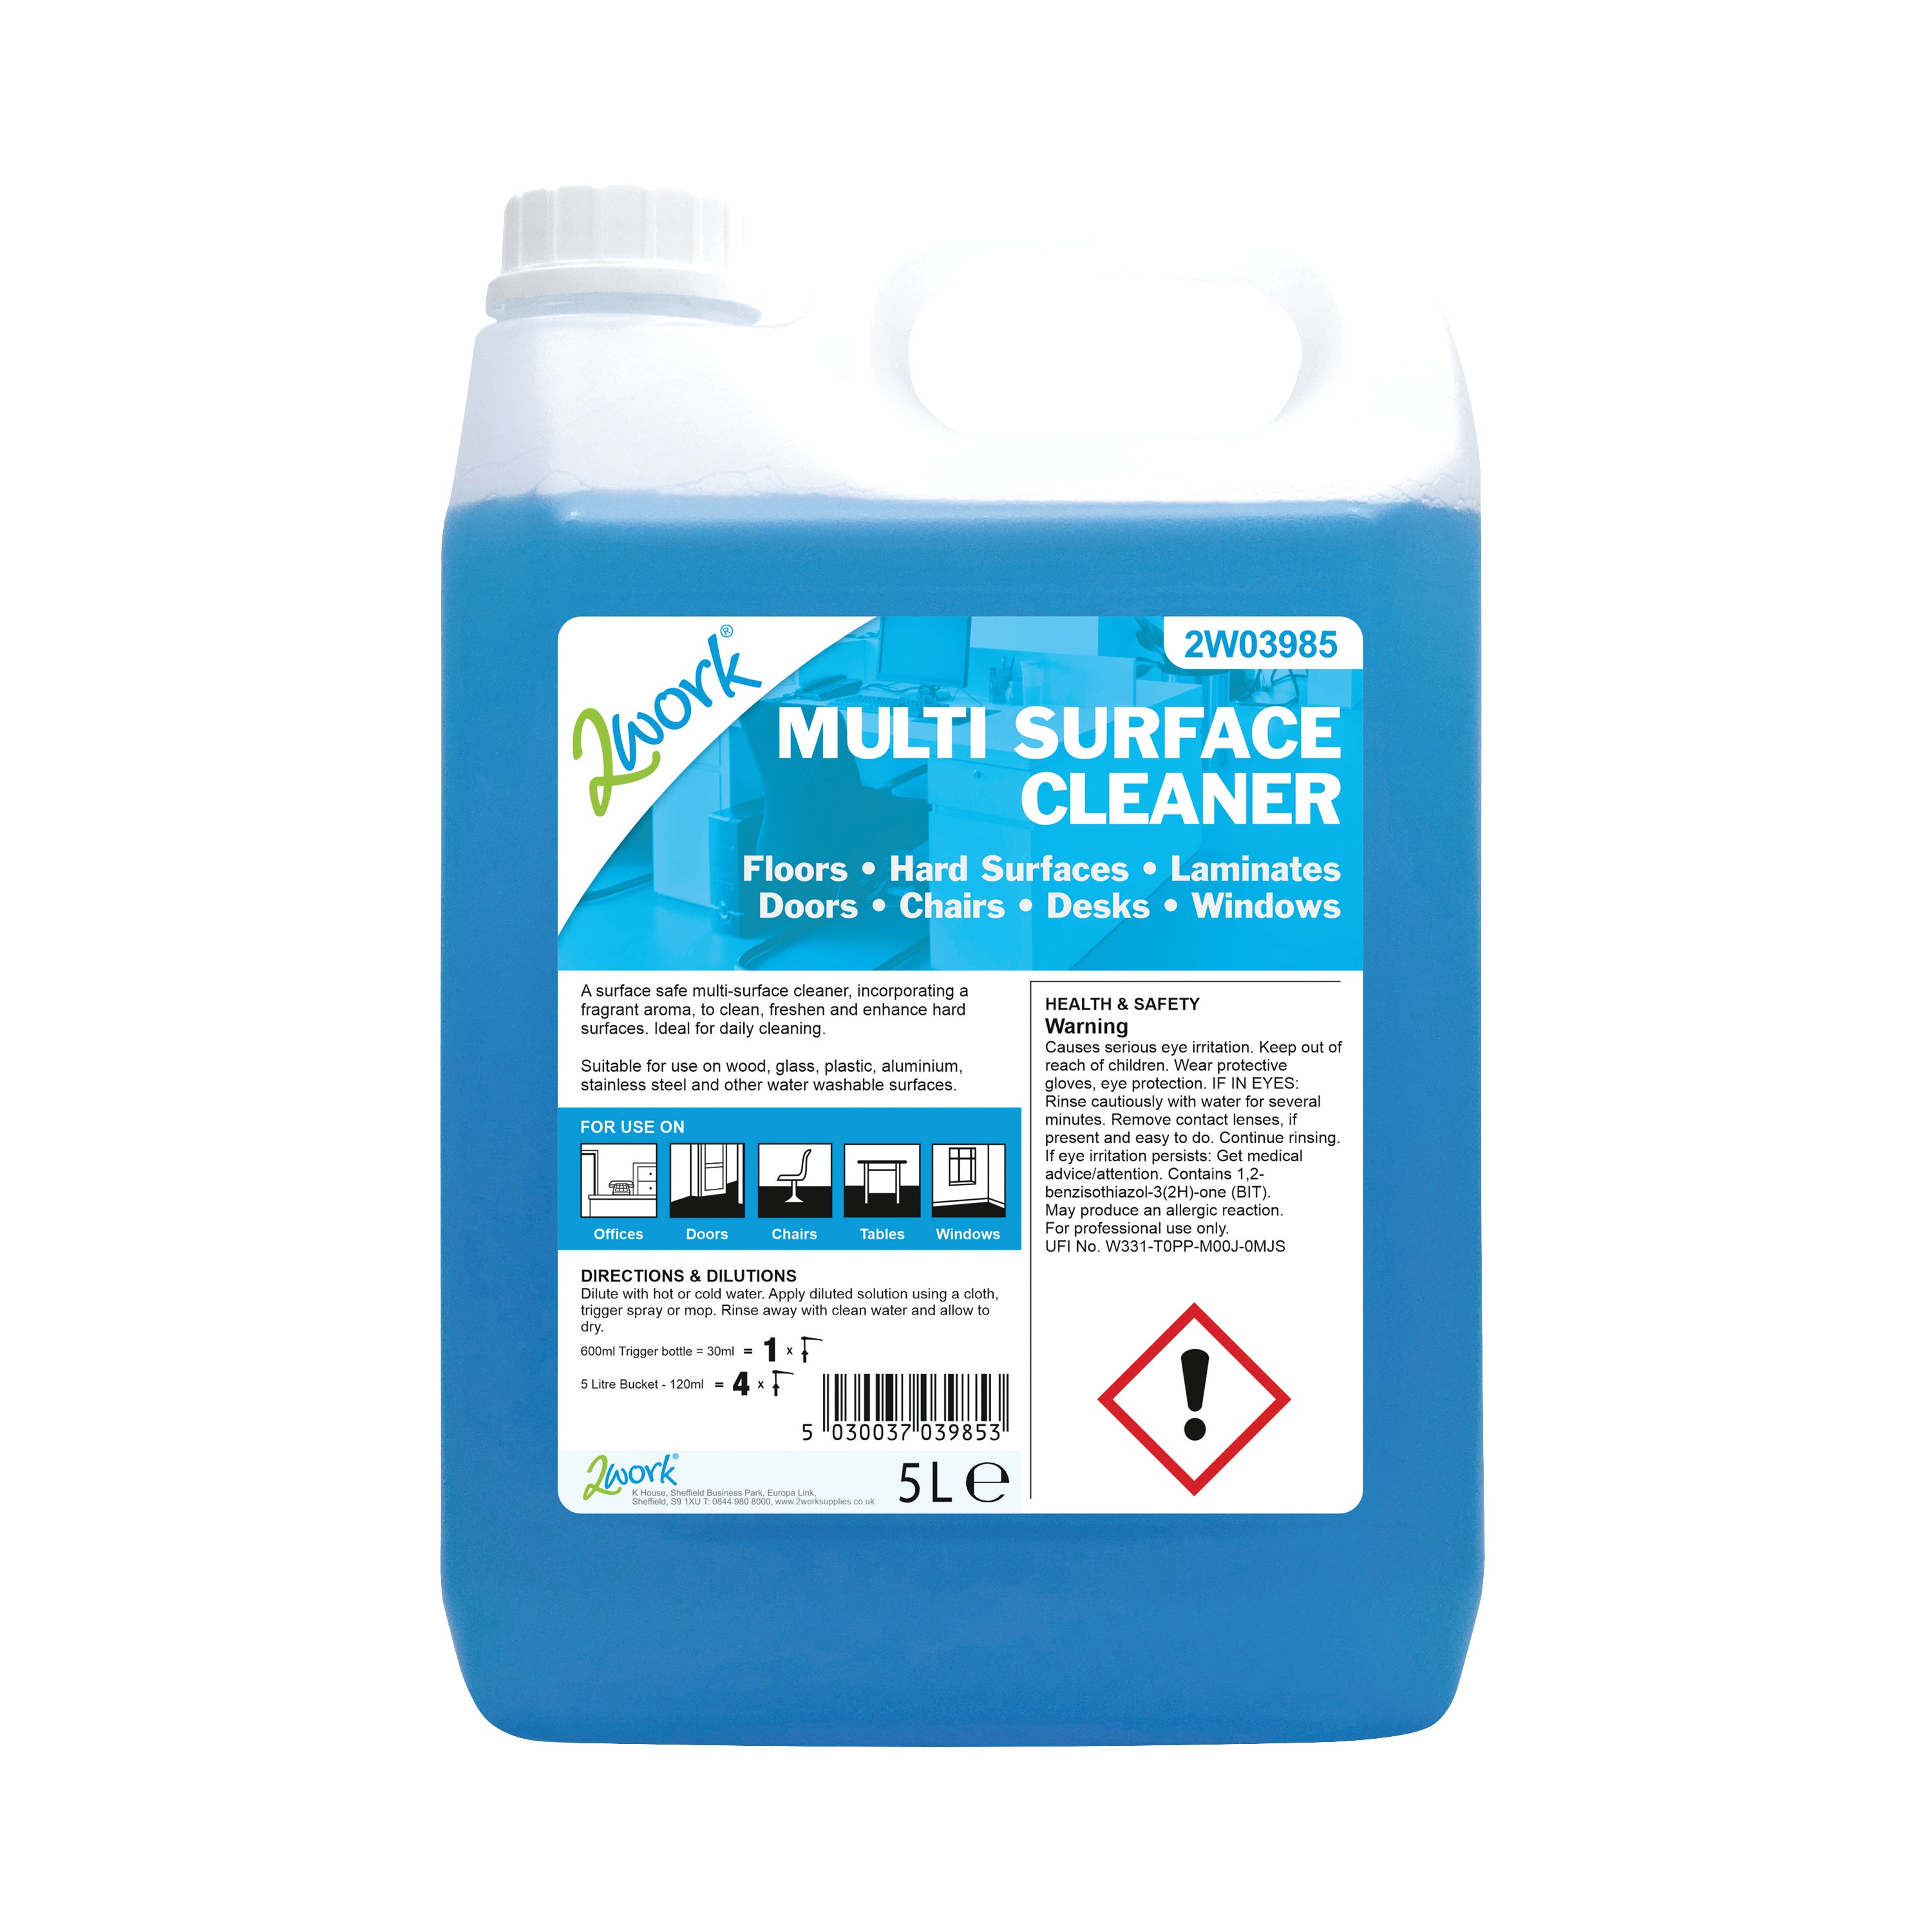 2Work Multi Surface Cleaner Concentrate 5 Litre 2W03985